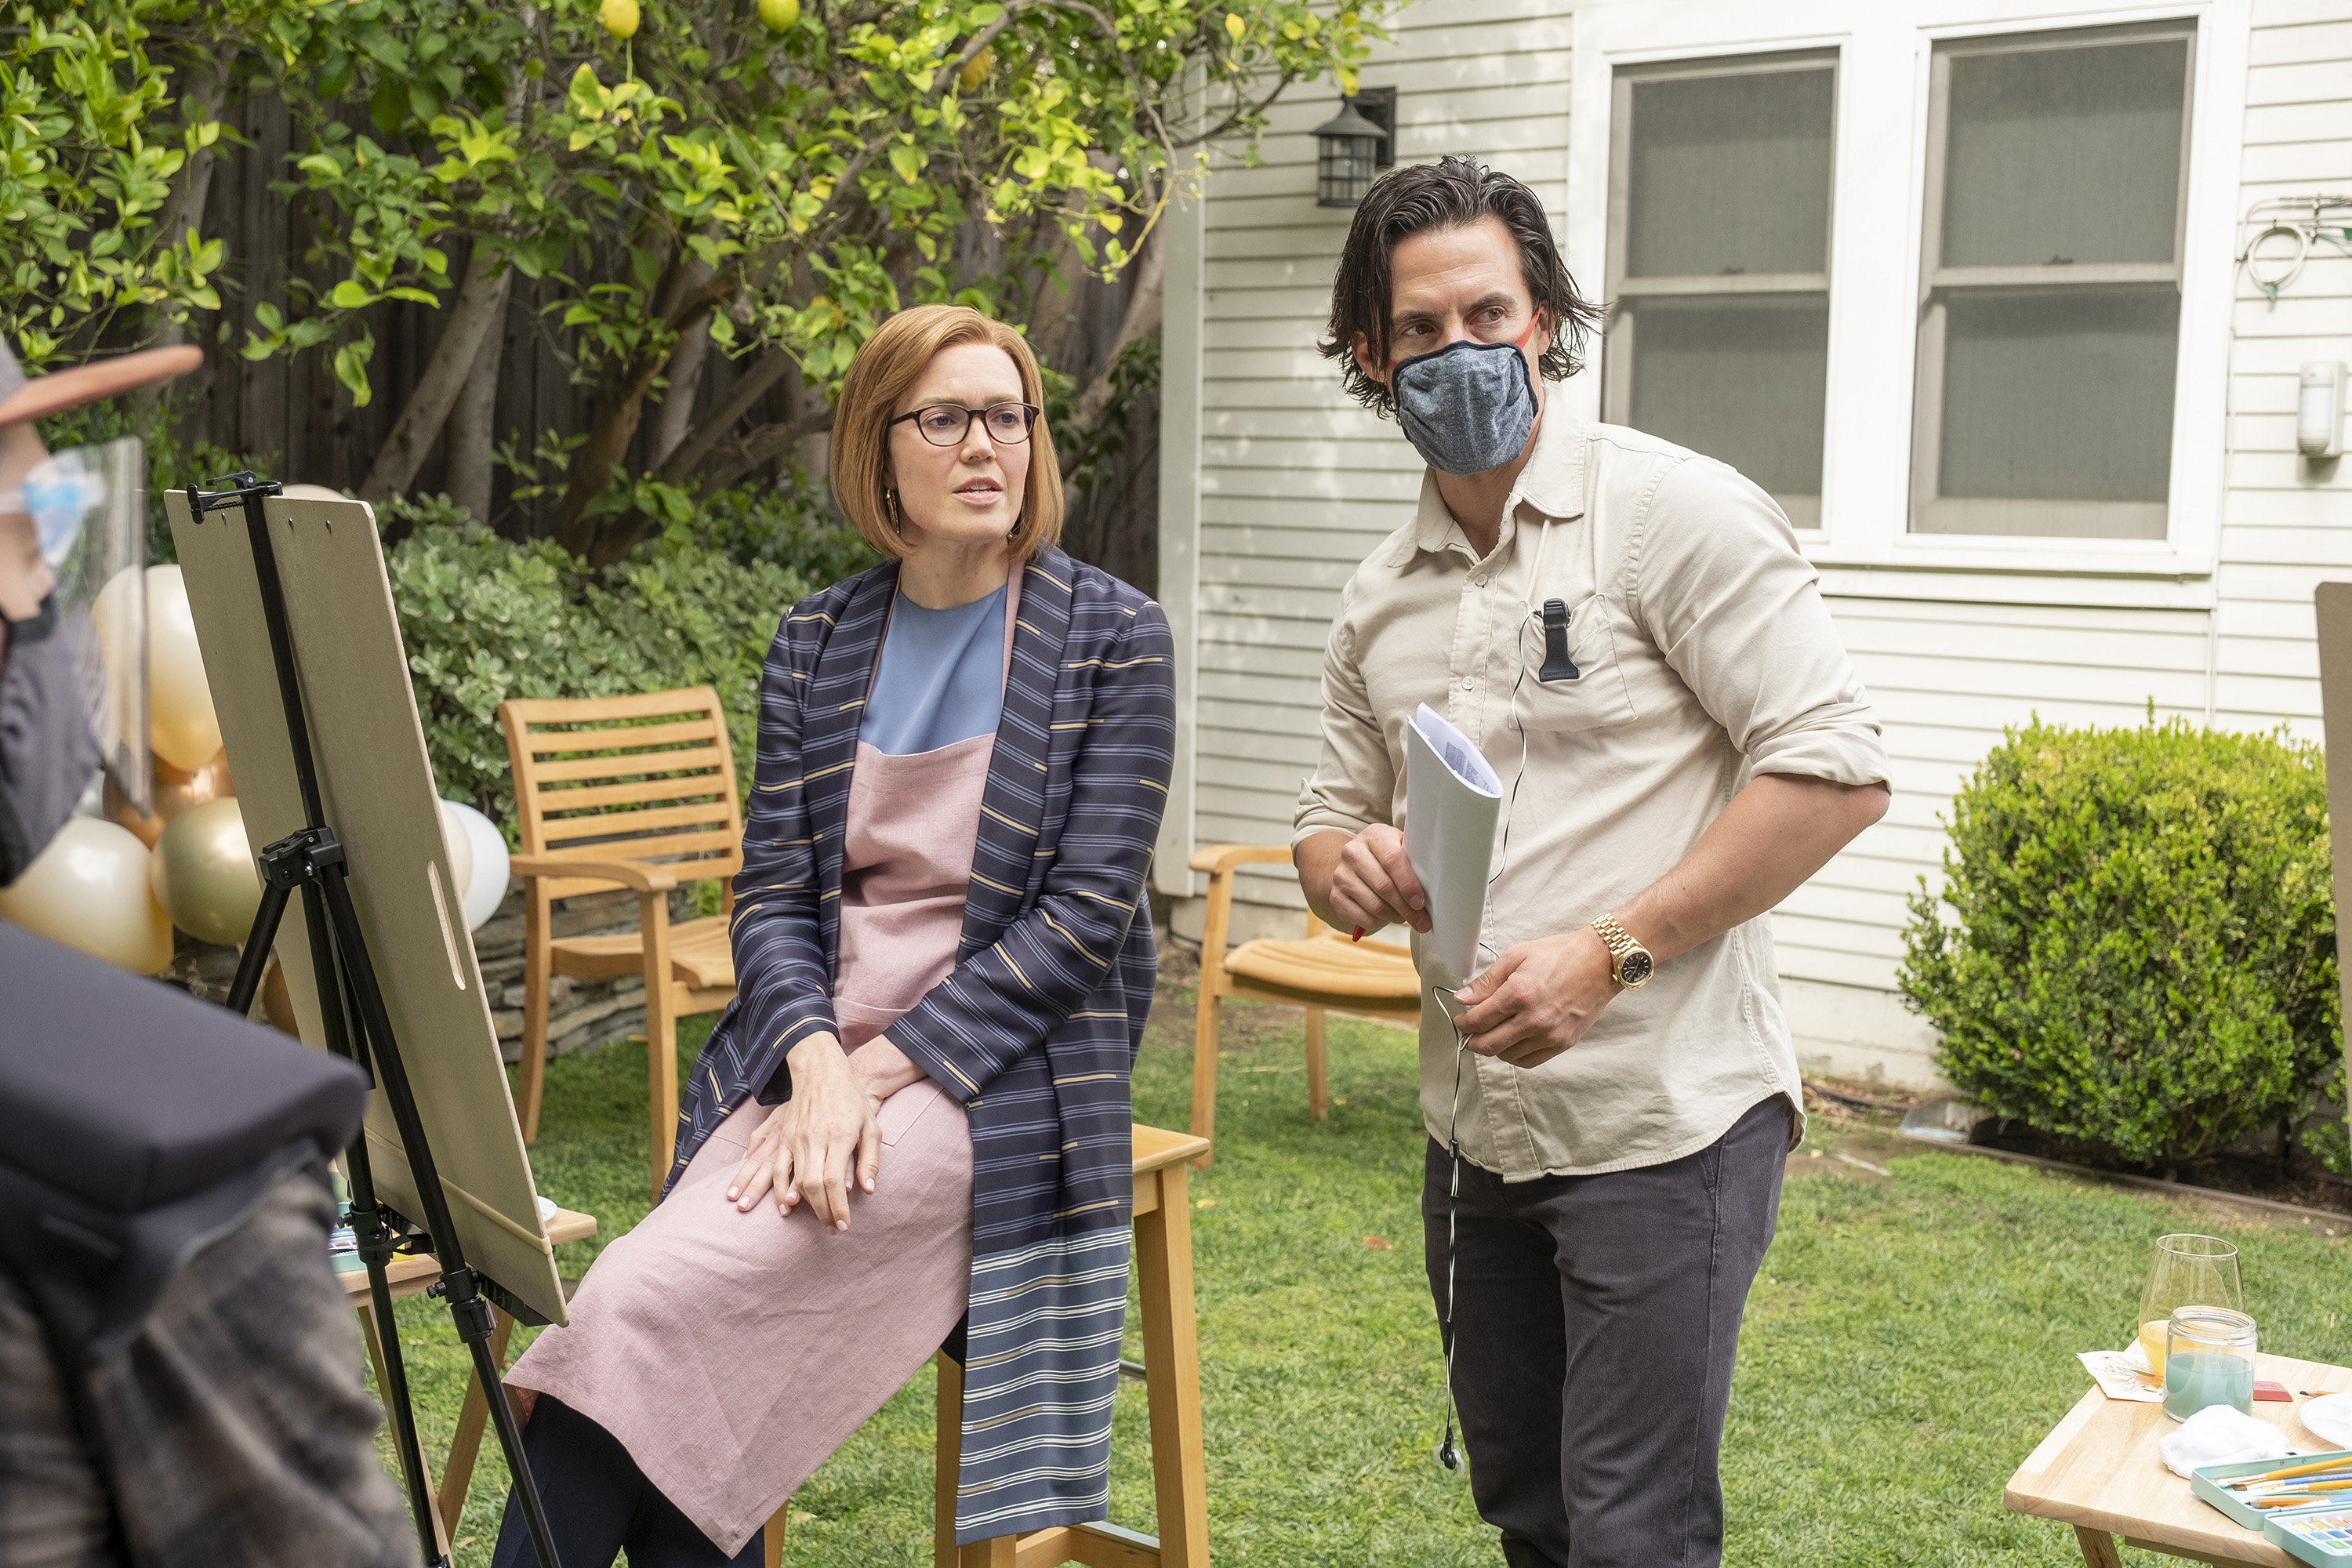 'This Is Us' star Milo Ventimiglia directs his co-star Mandy Moore during a scene. Moore, in character as present day Rebecca, wears a blue striped cardigan over a blue shirt and light pink apron. Ventimiglia wears a white button-up shirt, gray pants, and a gray mask.